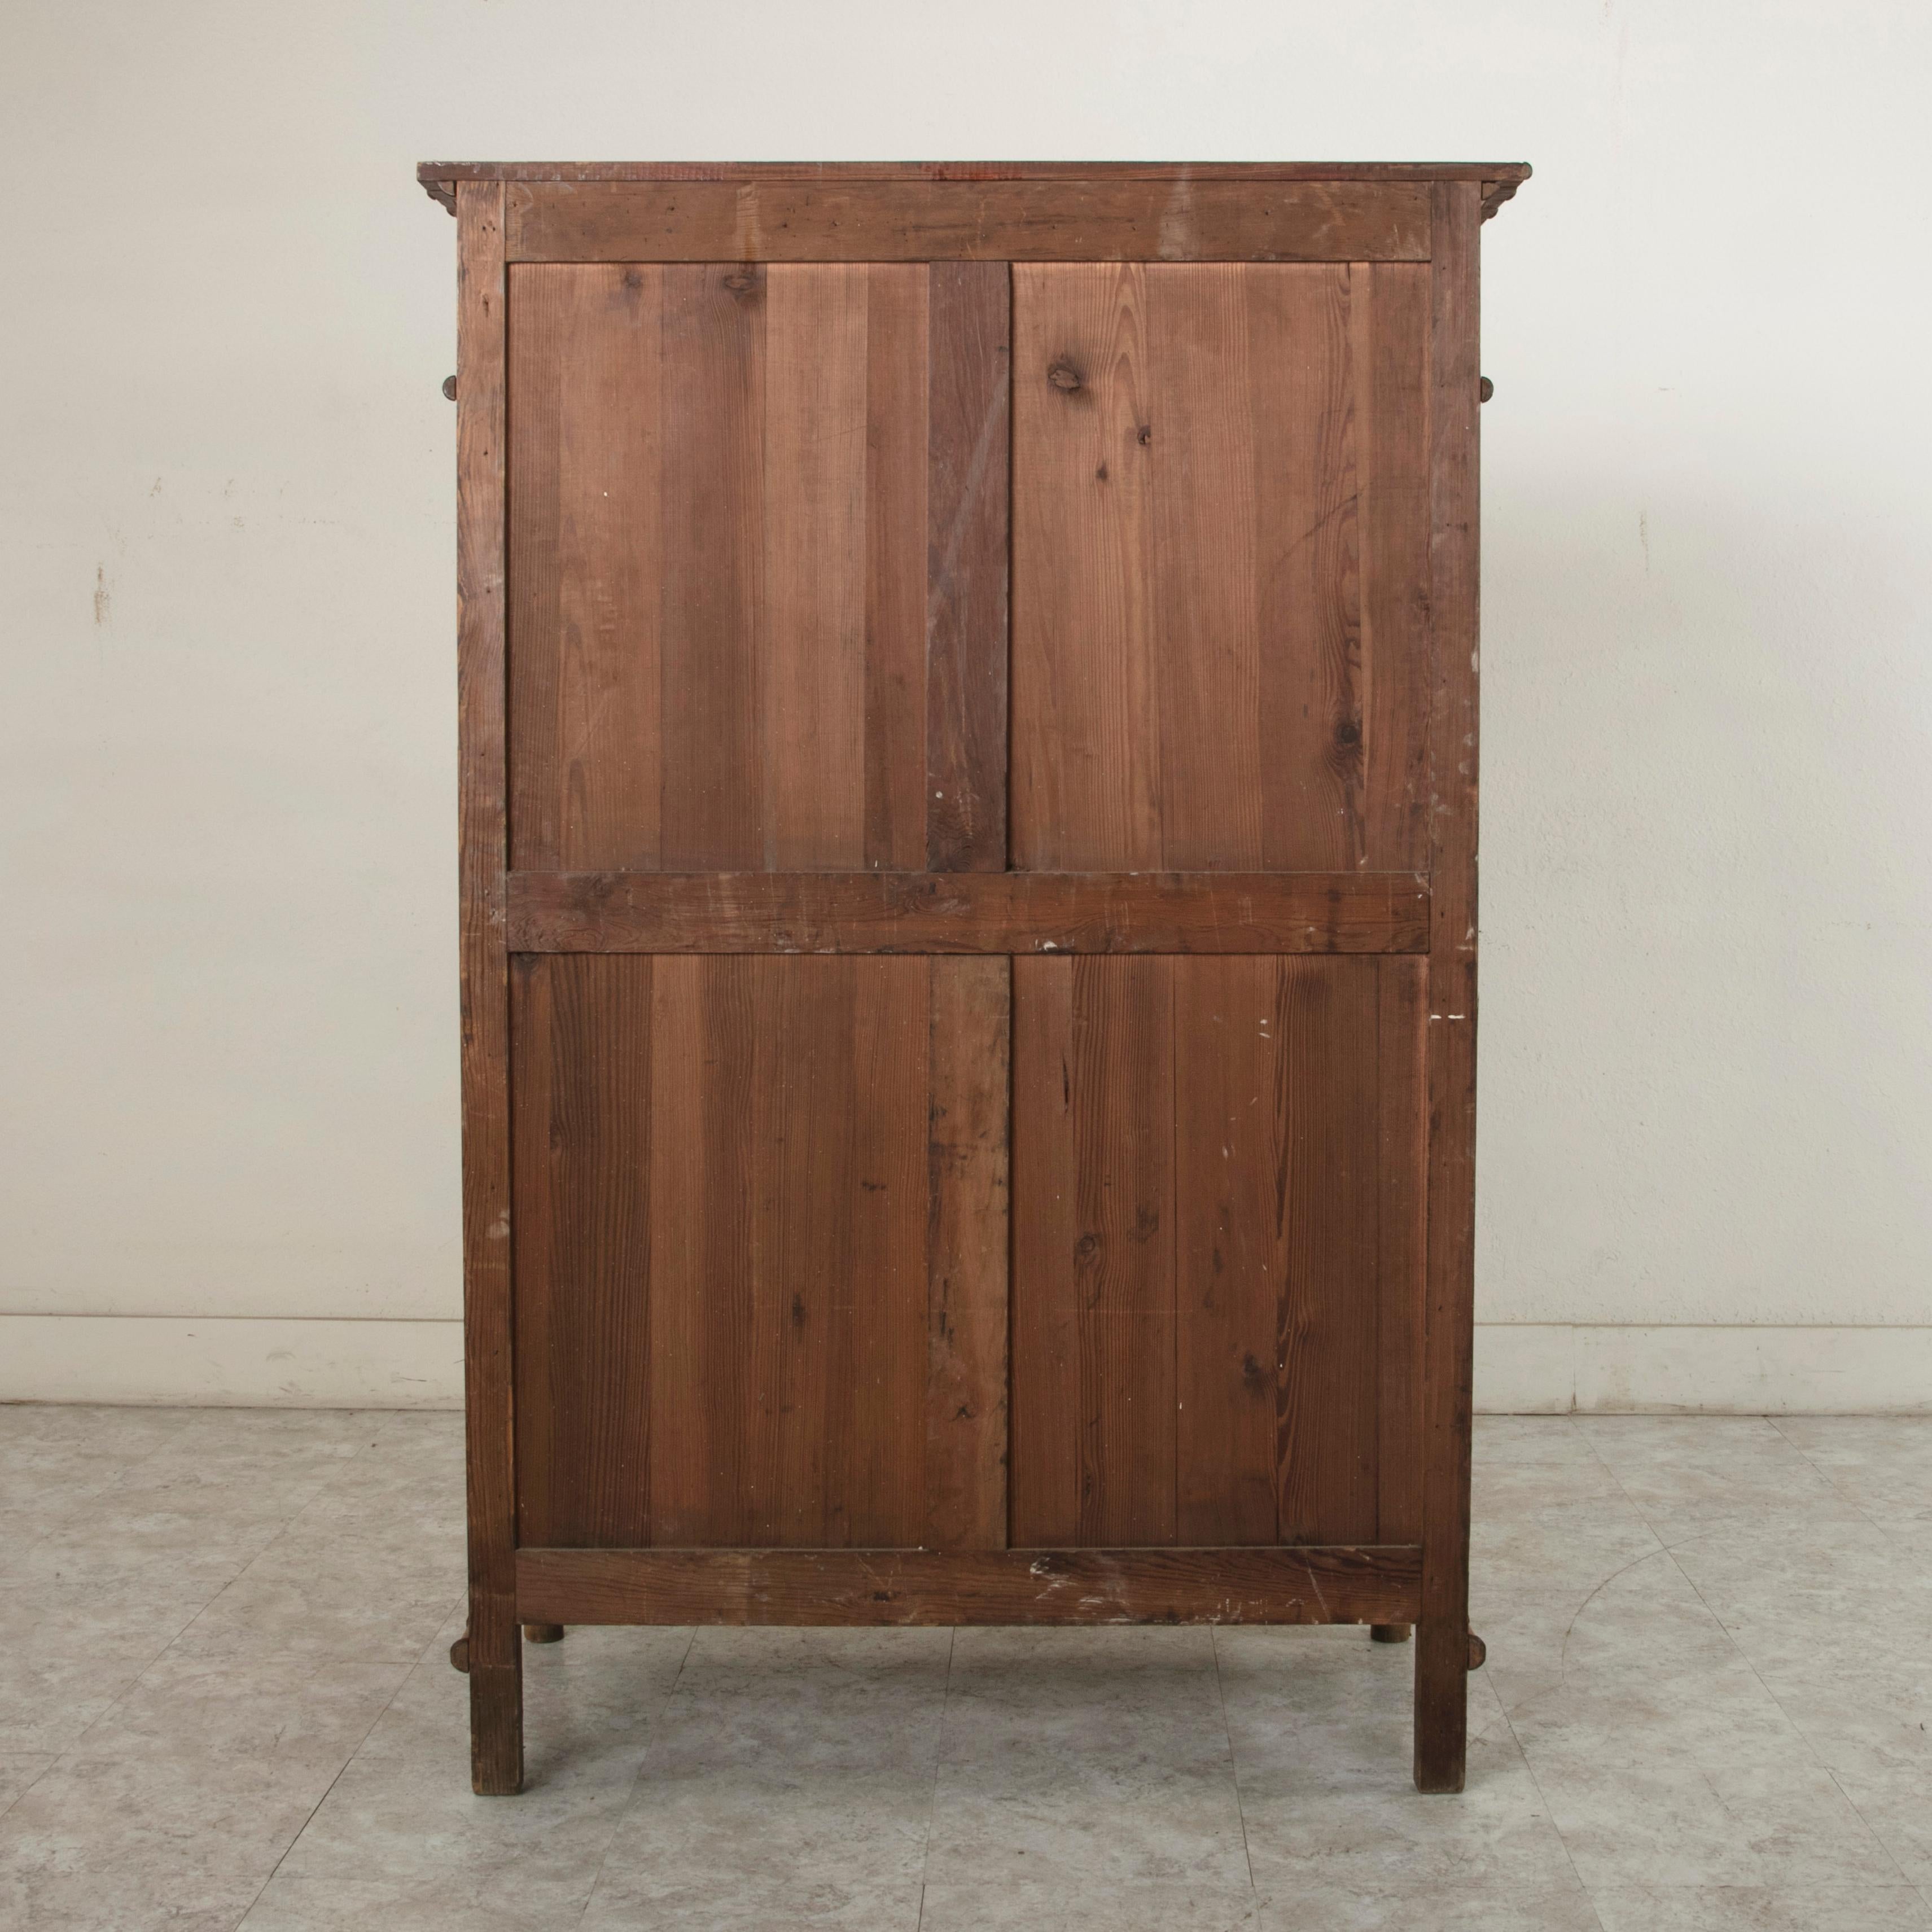 Early 20th Century French Colonial Style Faux Bamboo Pitch Pine Armoire Cabinet, circa 1900